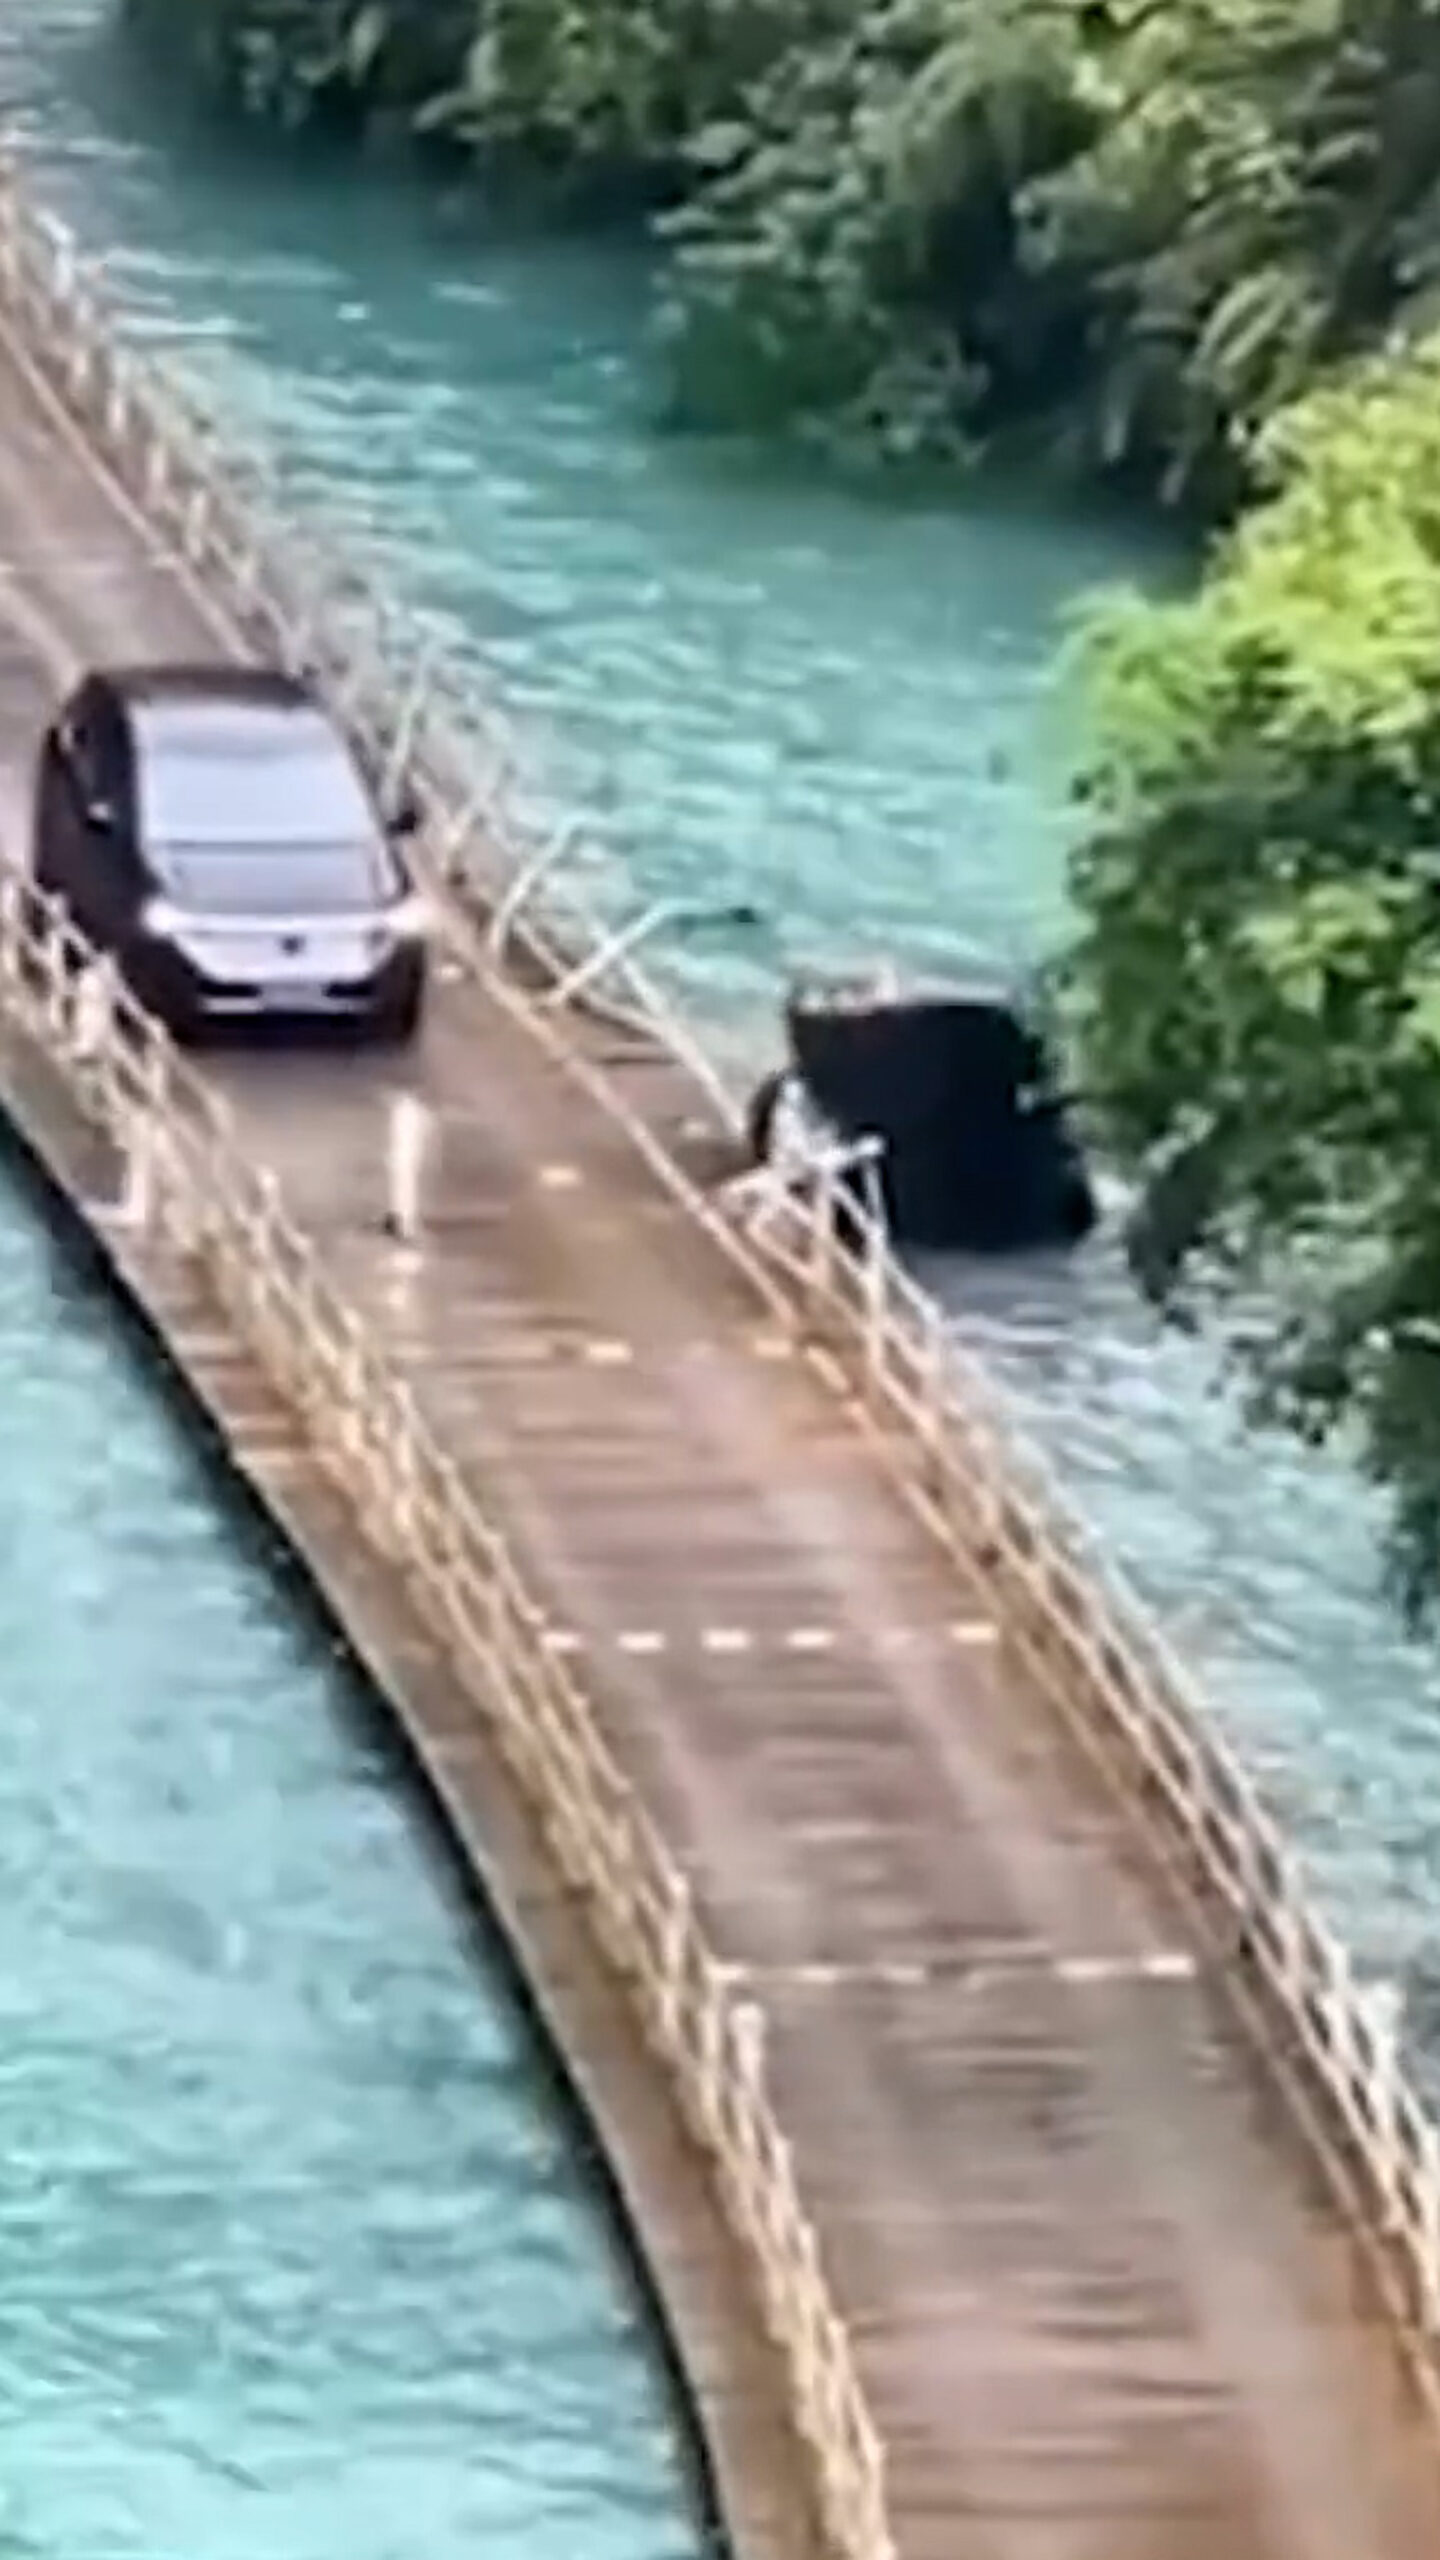 Read more about the article Five Killed After Tourist Van Crashes Off ‘World’s Most Beautiful Wooden Bridge’ Above River